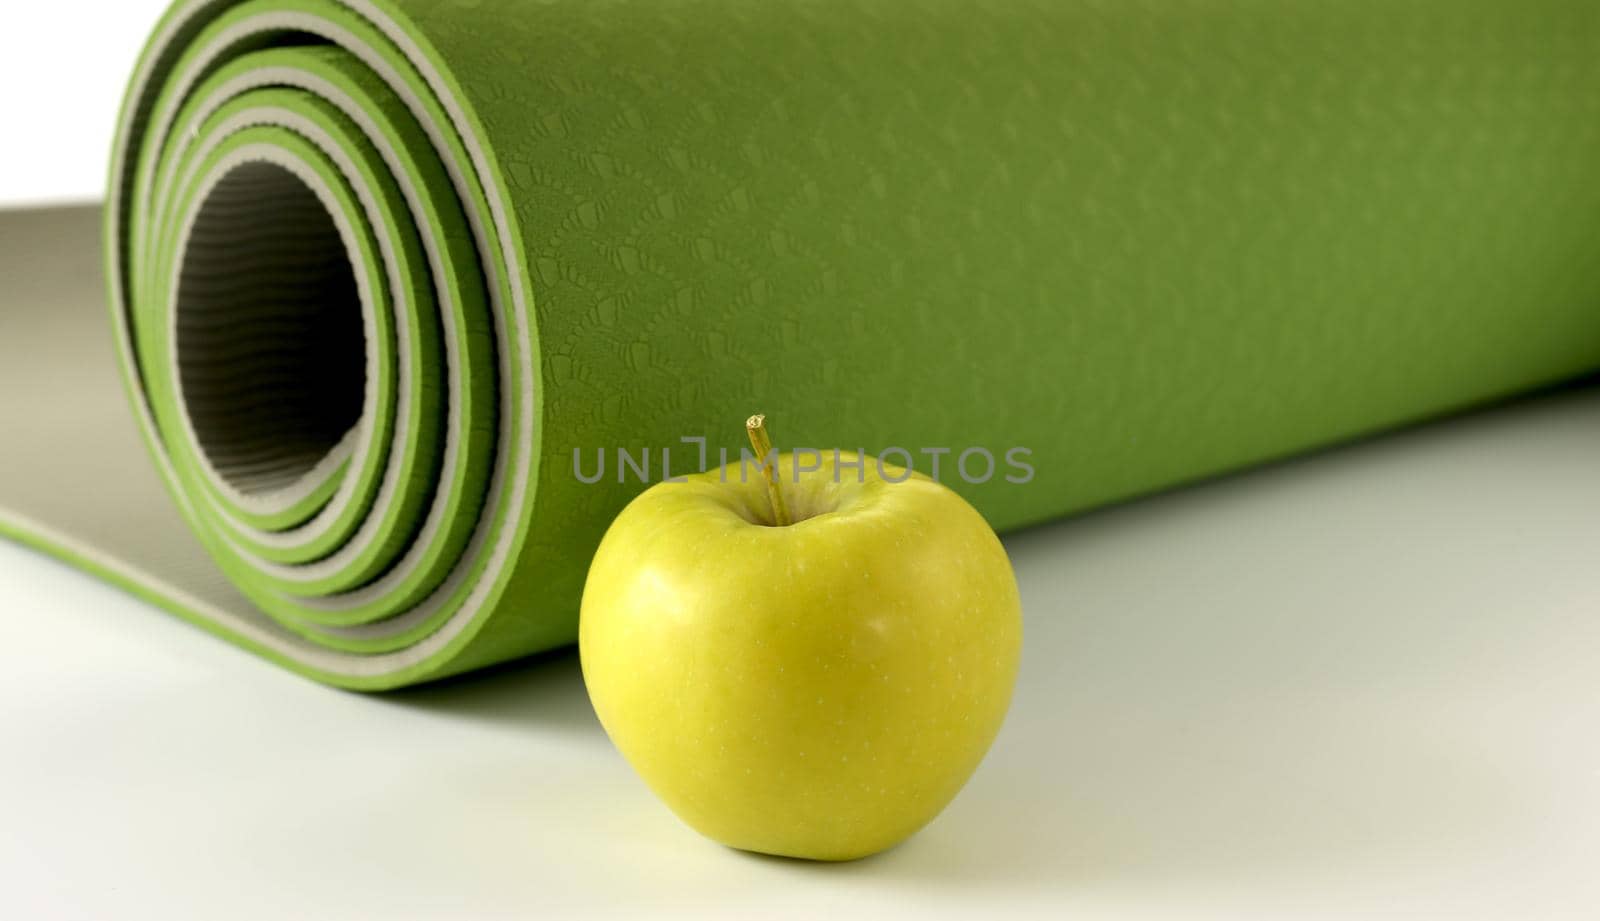 Yoga fitness, health life style. Yoga rolled green mat and green apple on white background. Place for text. Healthy lifestyle, fitness, sport concept